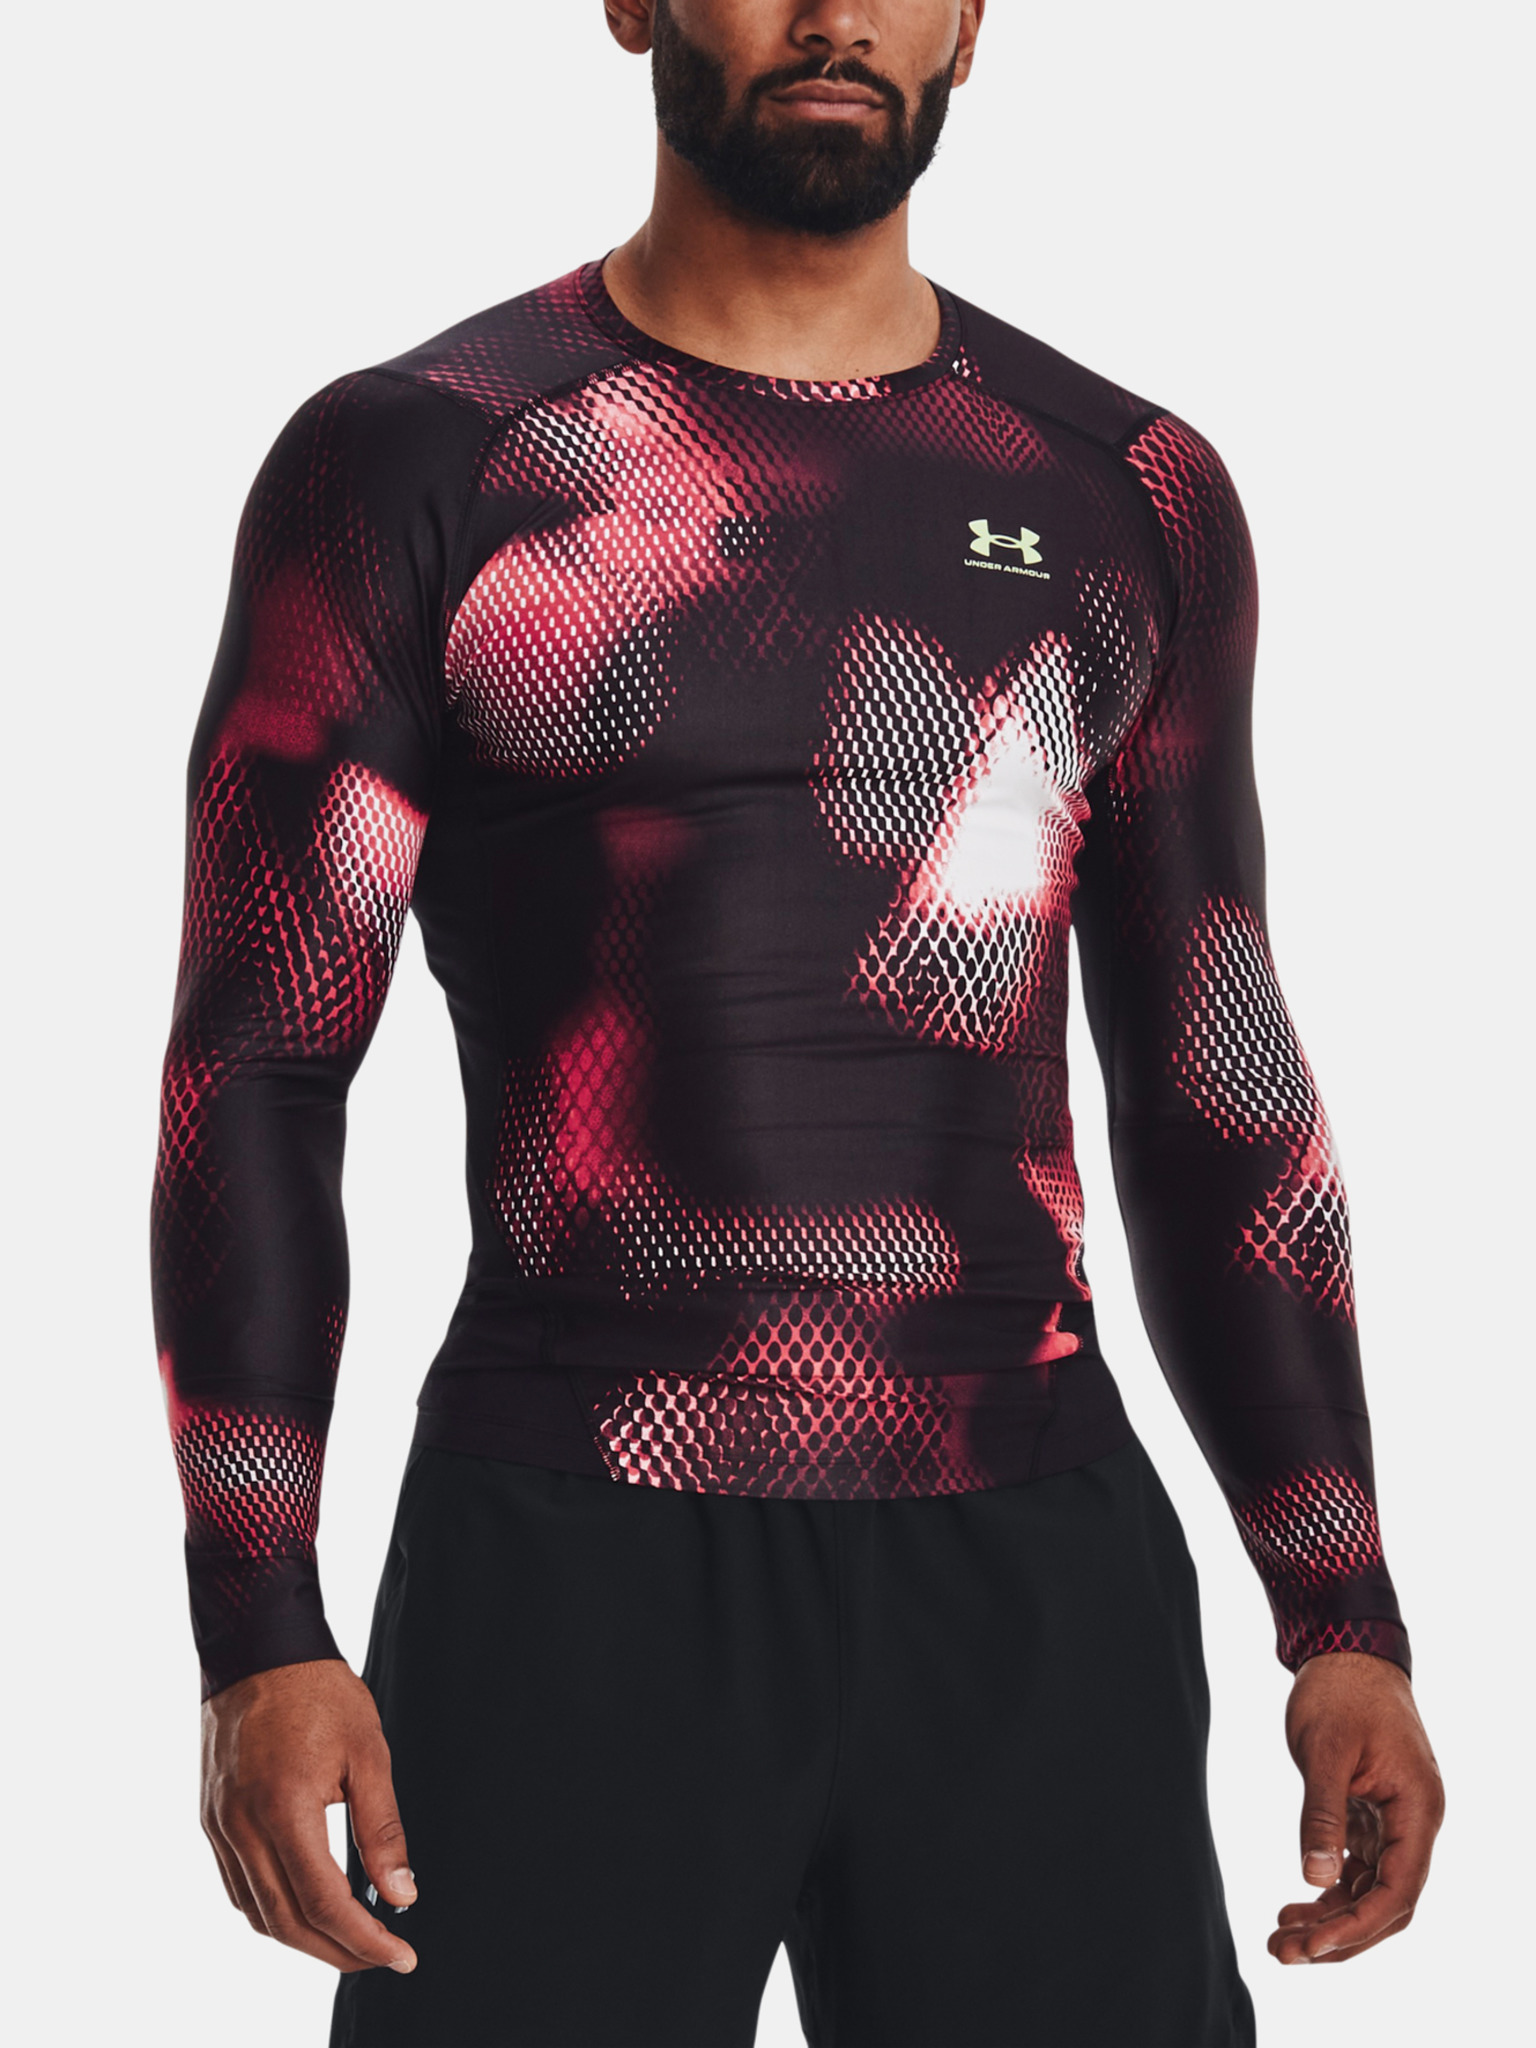 News: Latest Under Armour Iso-Chill gear takes you from hot to cold